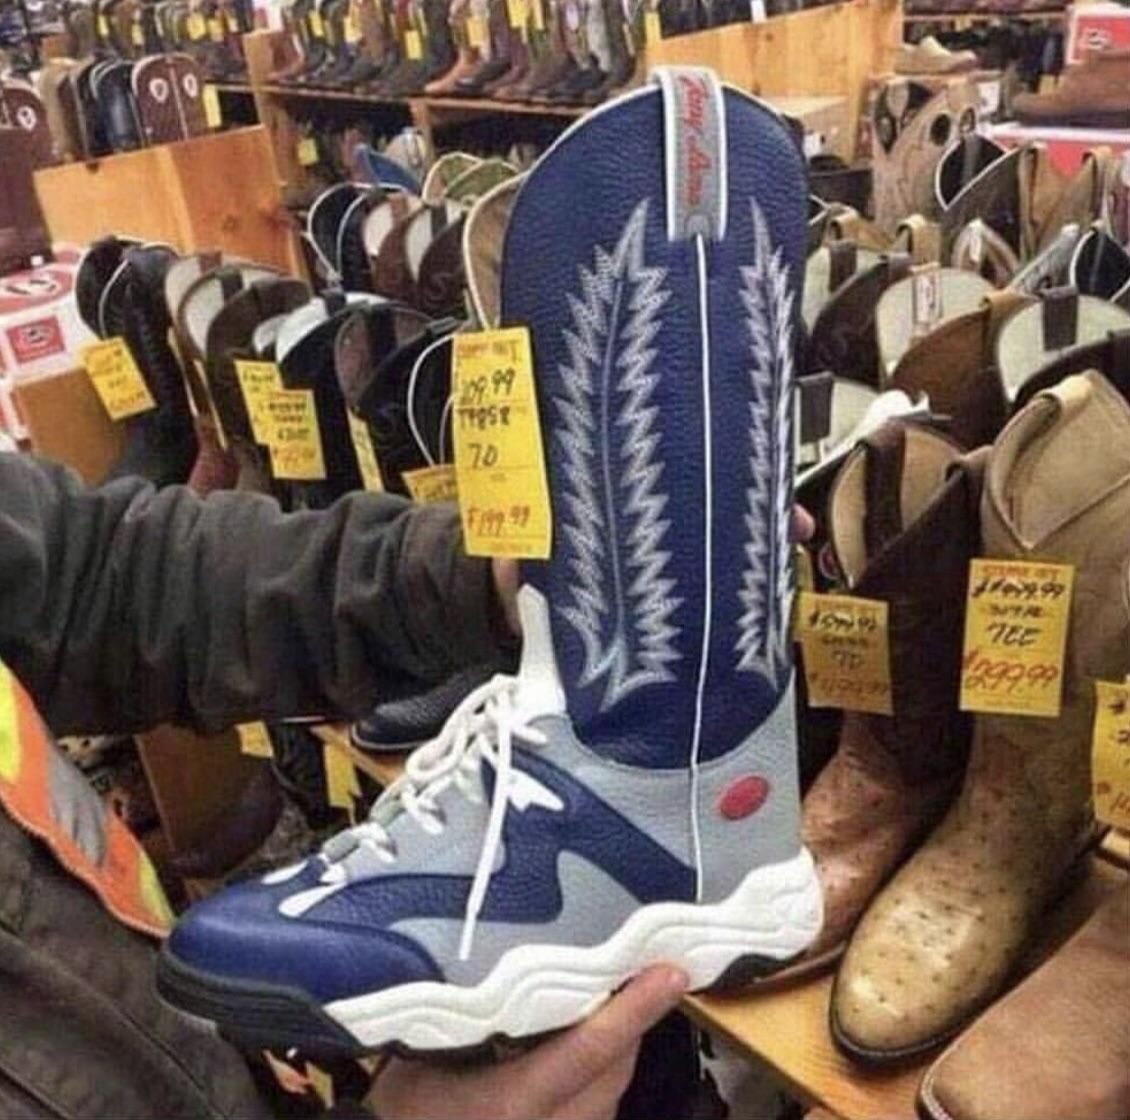 “Old Town Road” in physical form.